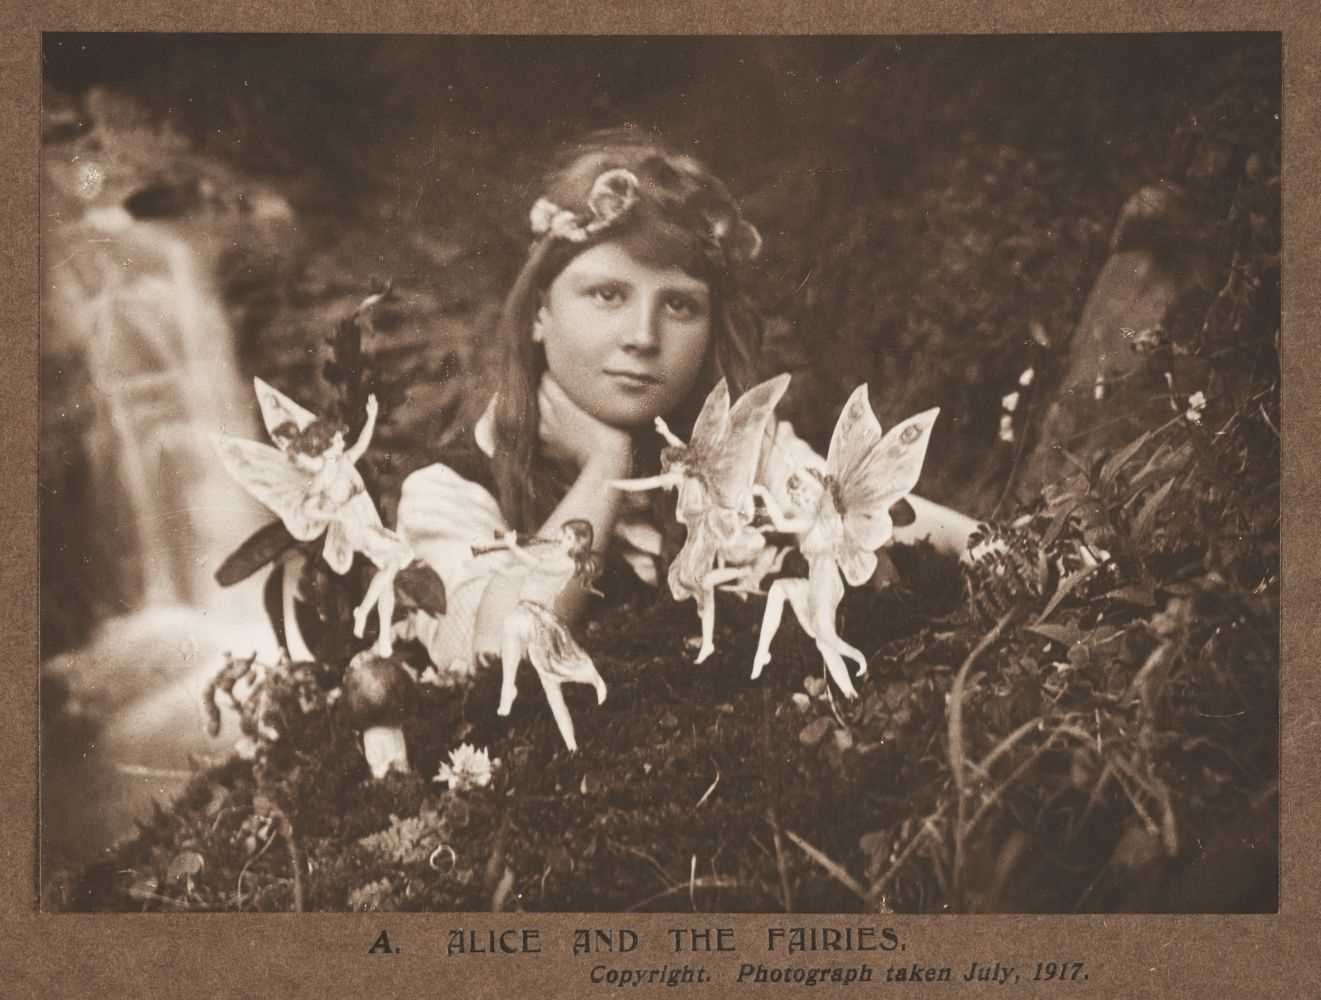 Lot 39 - Cottingley Fairies. 4 vintage sepia gelatin silver print photographs, printed by Harold Snelling